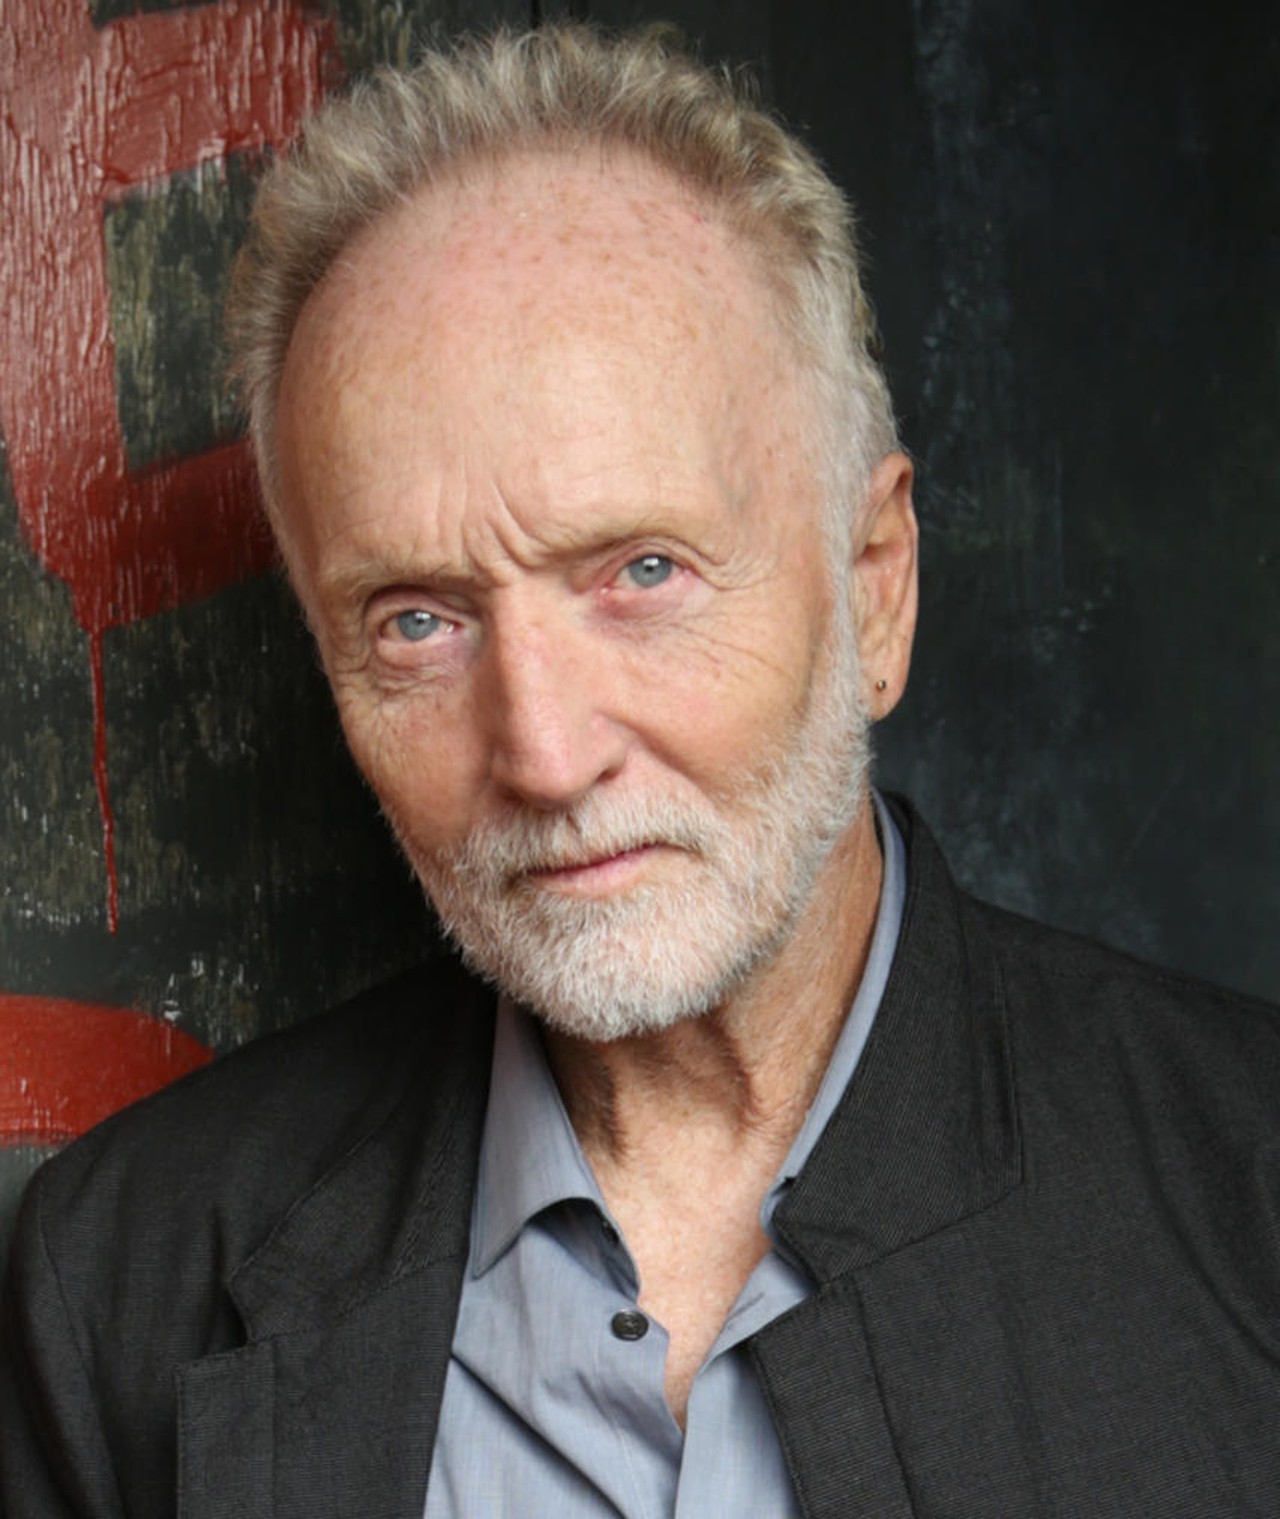 Tobin Bell is set to return as Jigsaw for Next 'Saw' Film